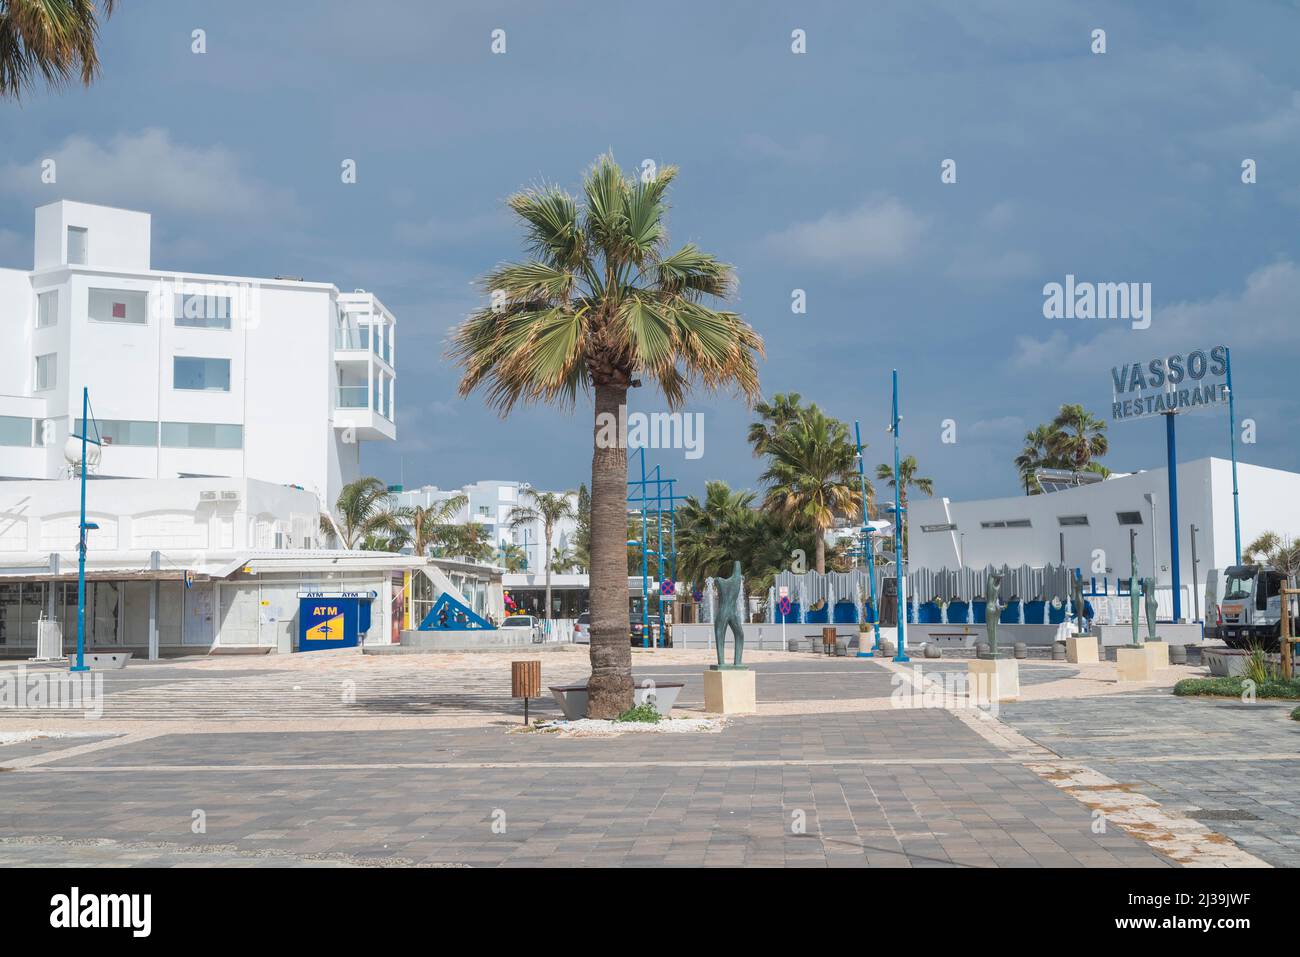 August 12 promenade ayaya napa in cyprus with palm trees Stock Photo